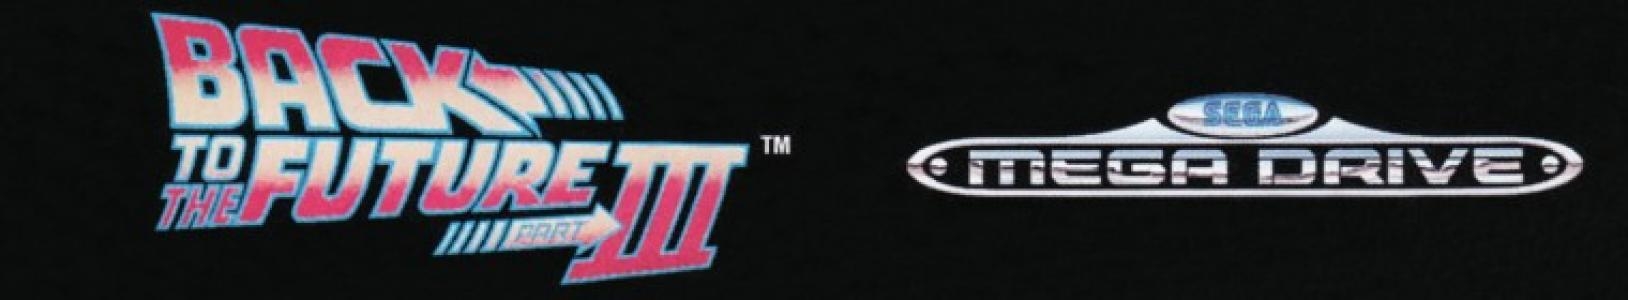 Back to the Future Part III banner